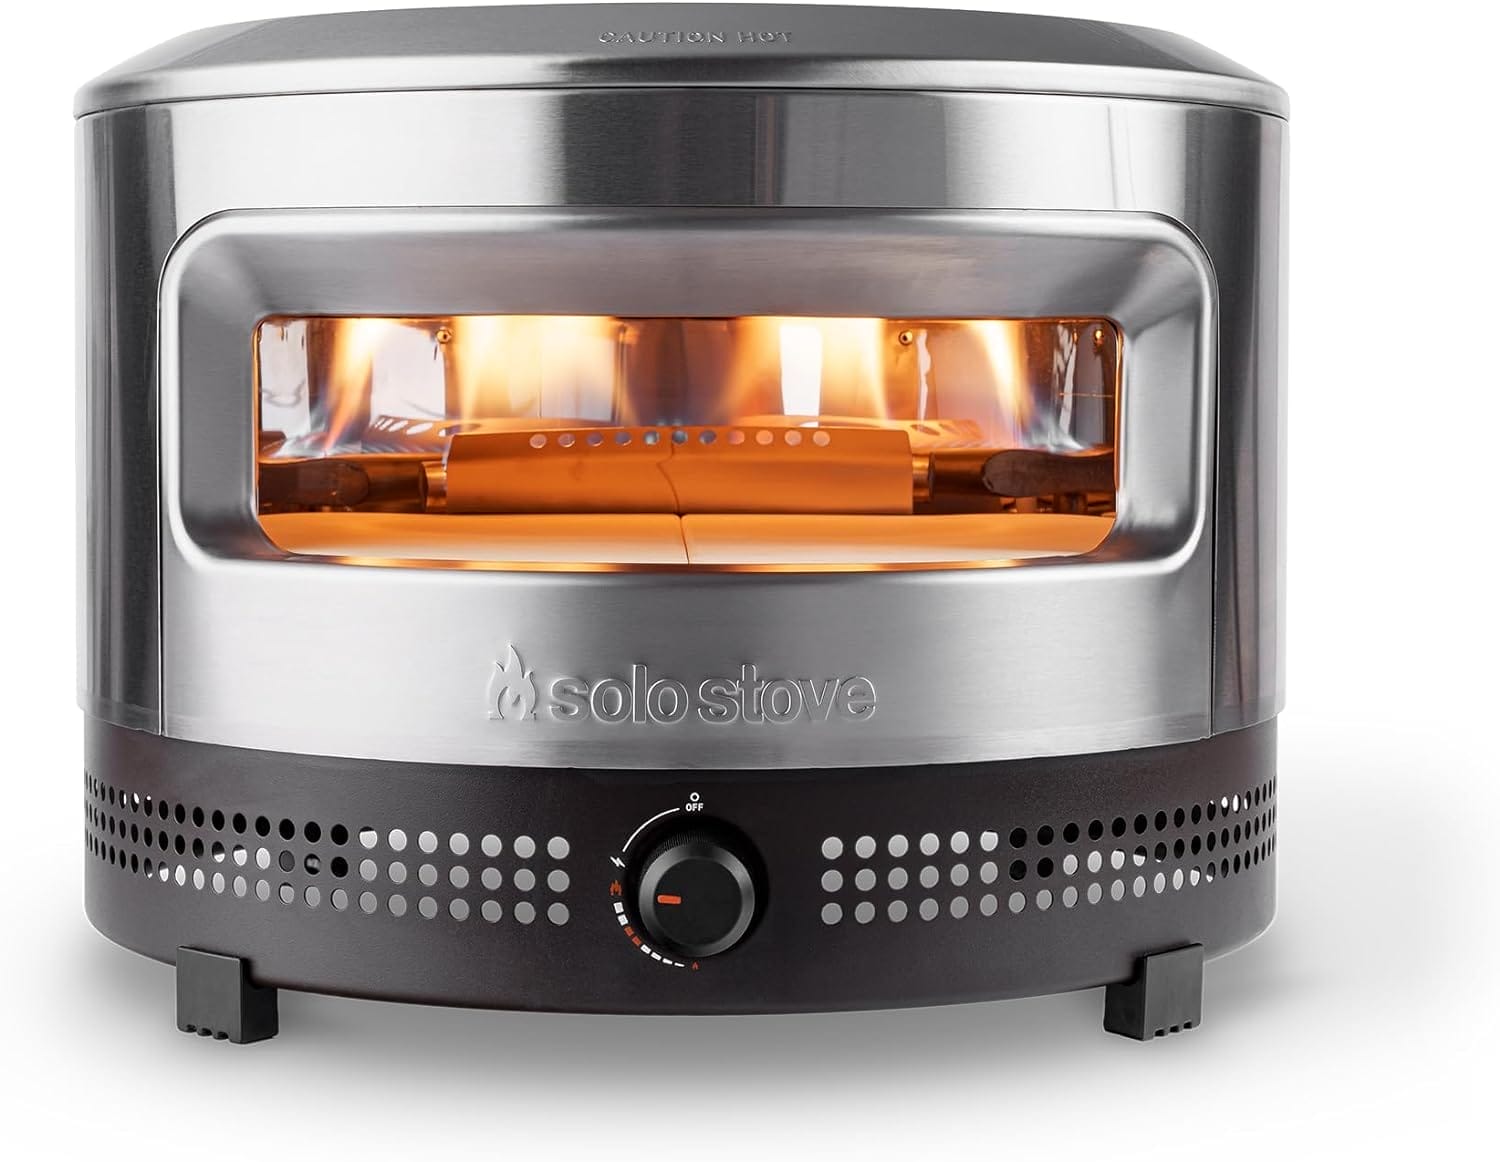 How to Find the Best Commercial Pizza Oven